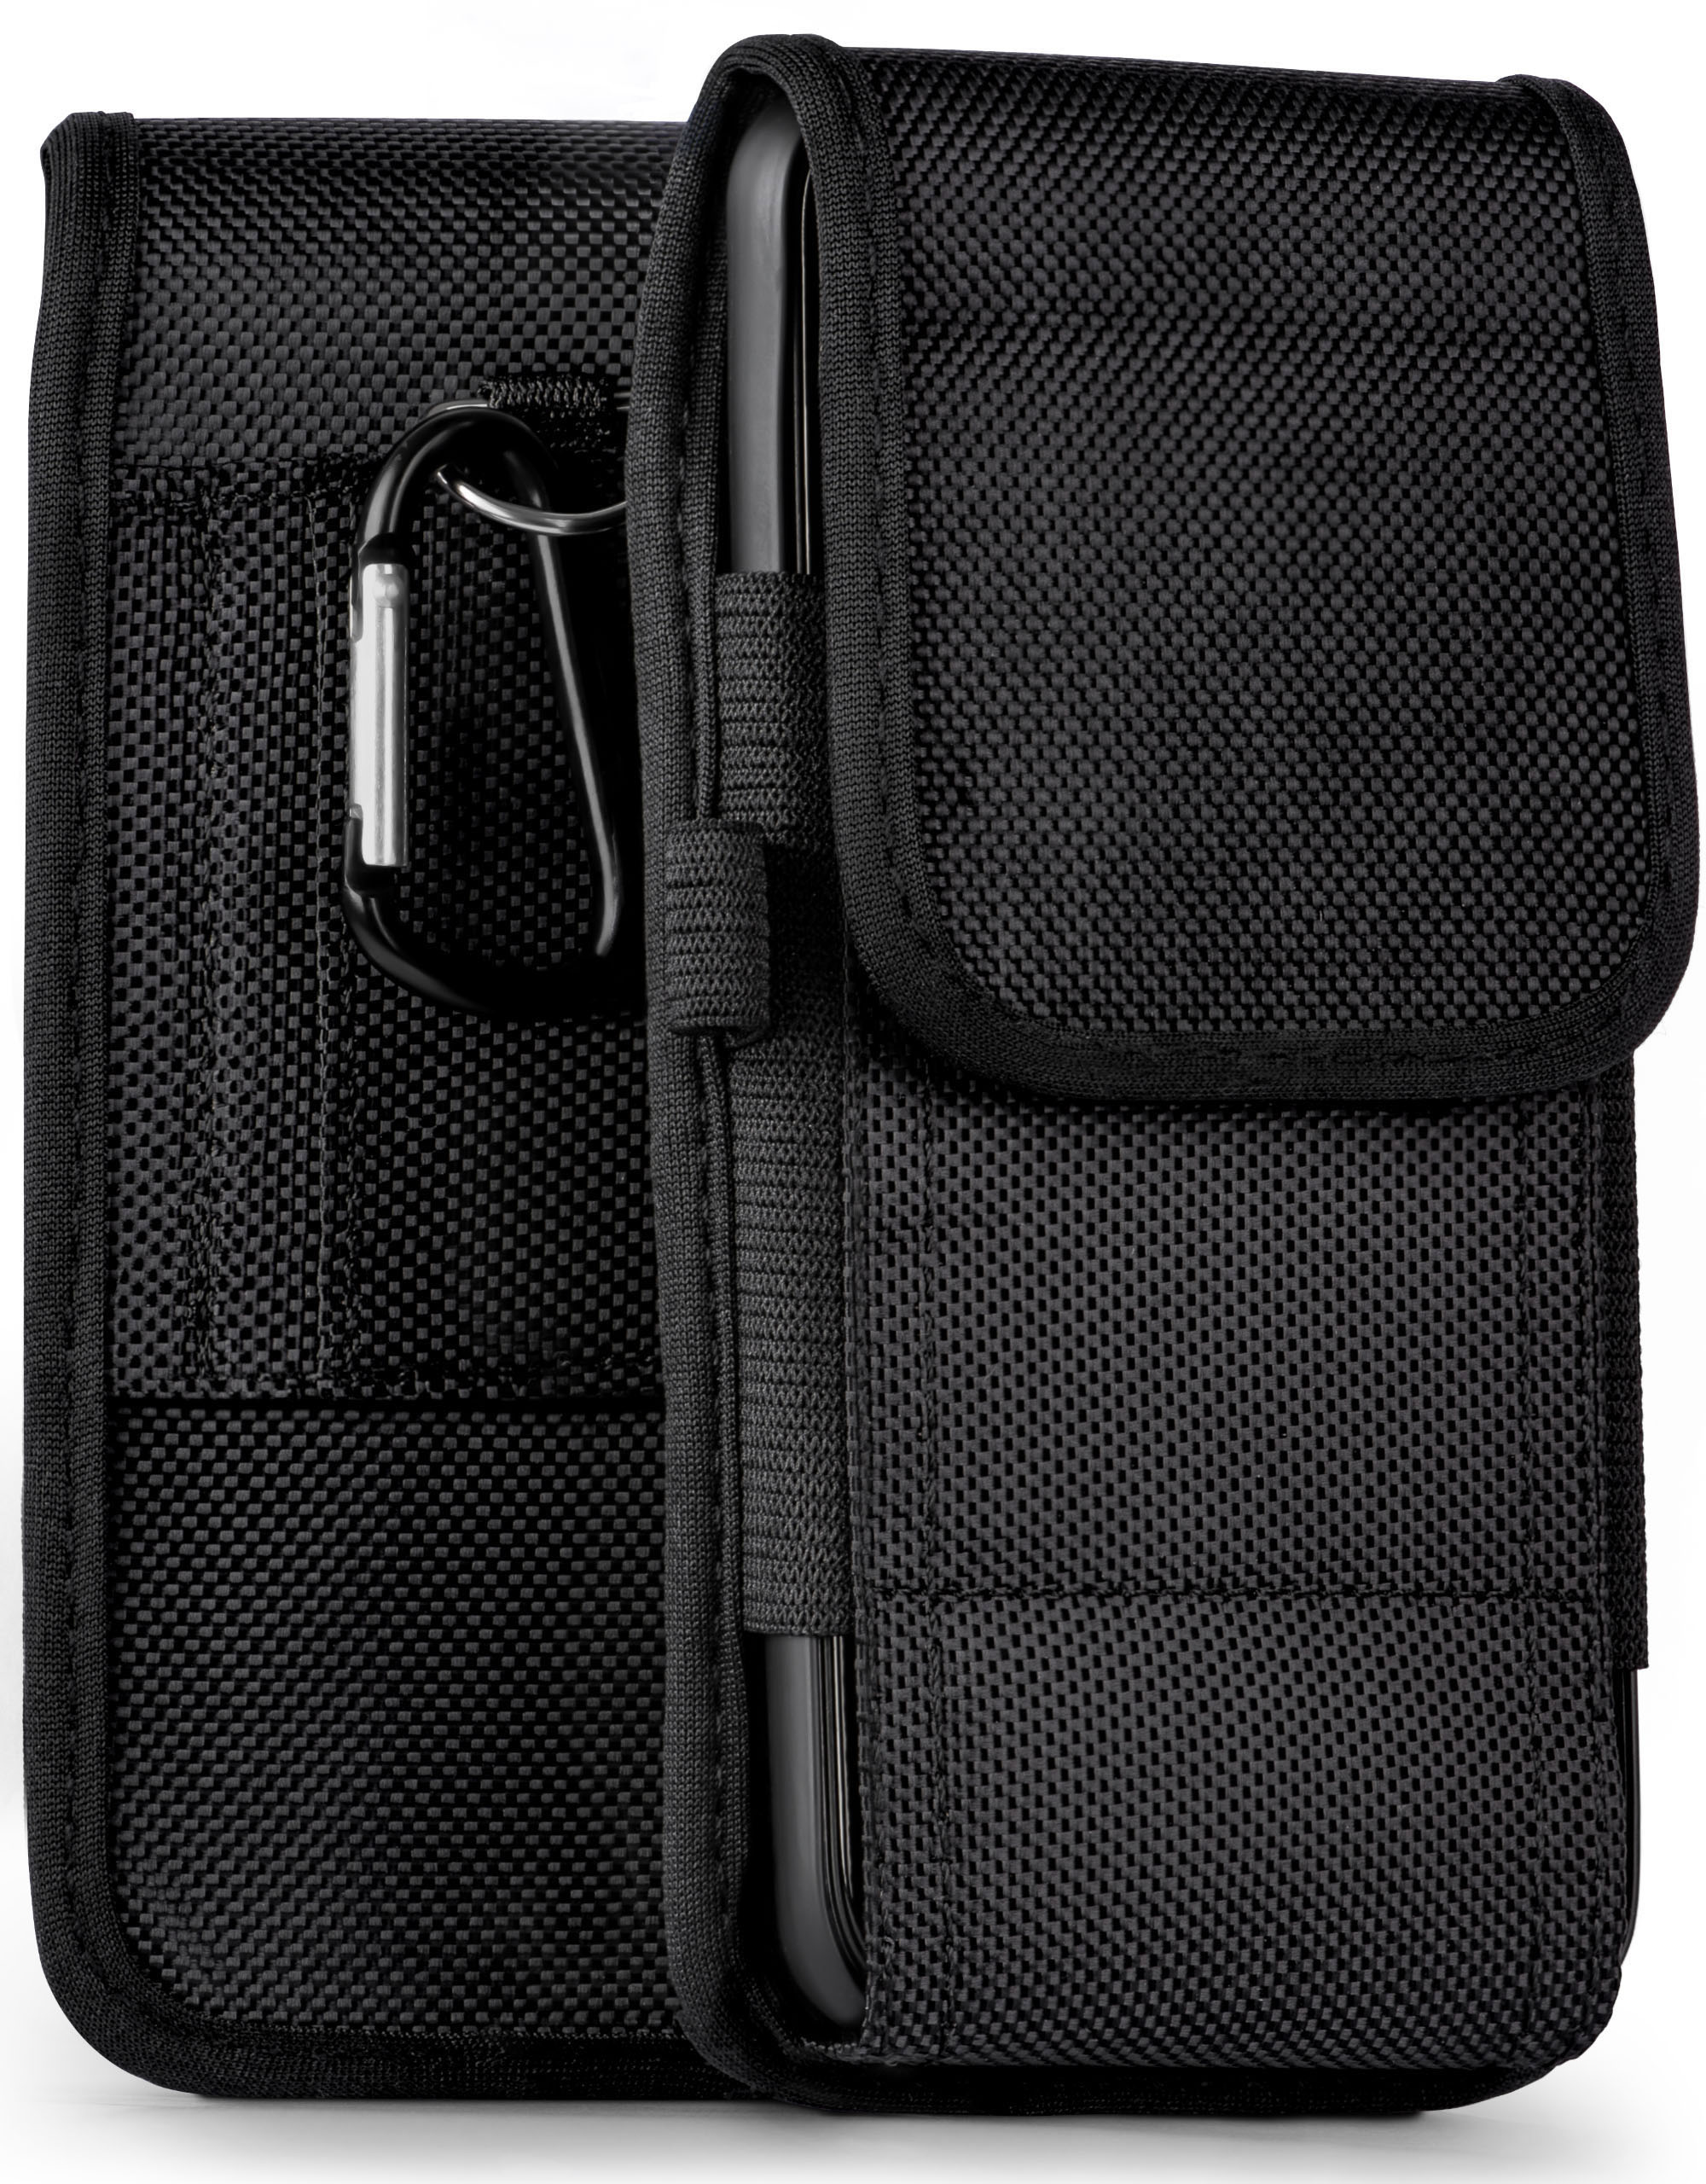 Agility 3, Trail Holster, Sunny Case, Wiko, MOEX